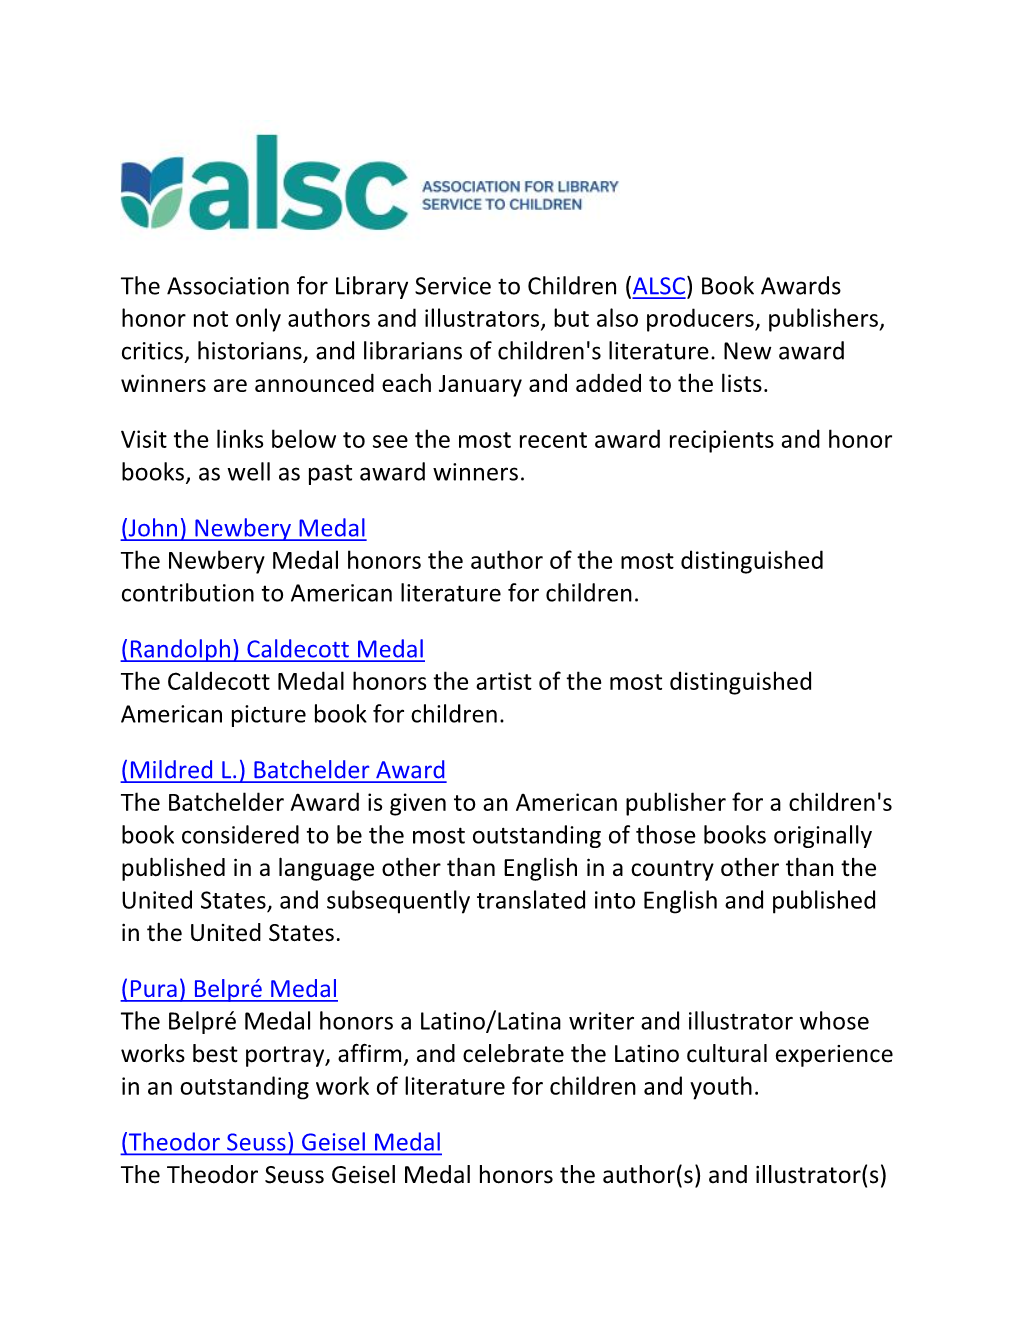 The Association for Library Service to Children (ALSC) Book Awards